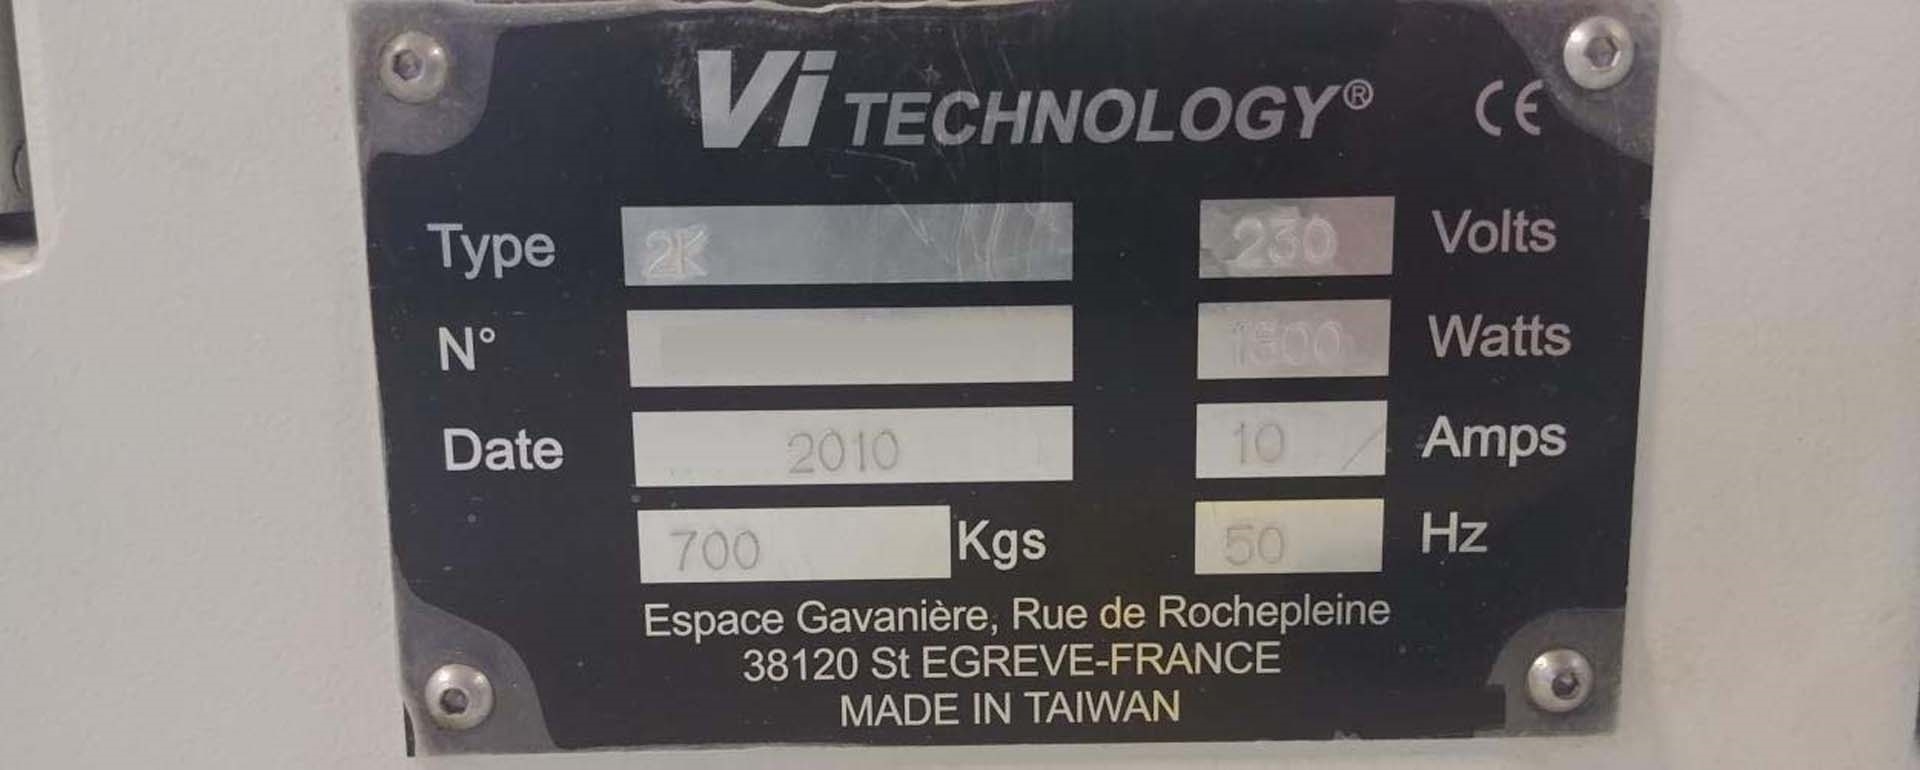 Photo Used VI TECHNOLOGY 2000 For Sale